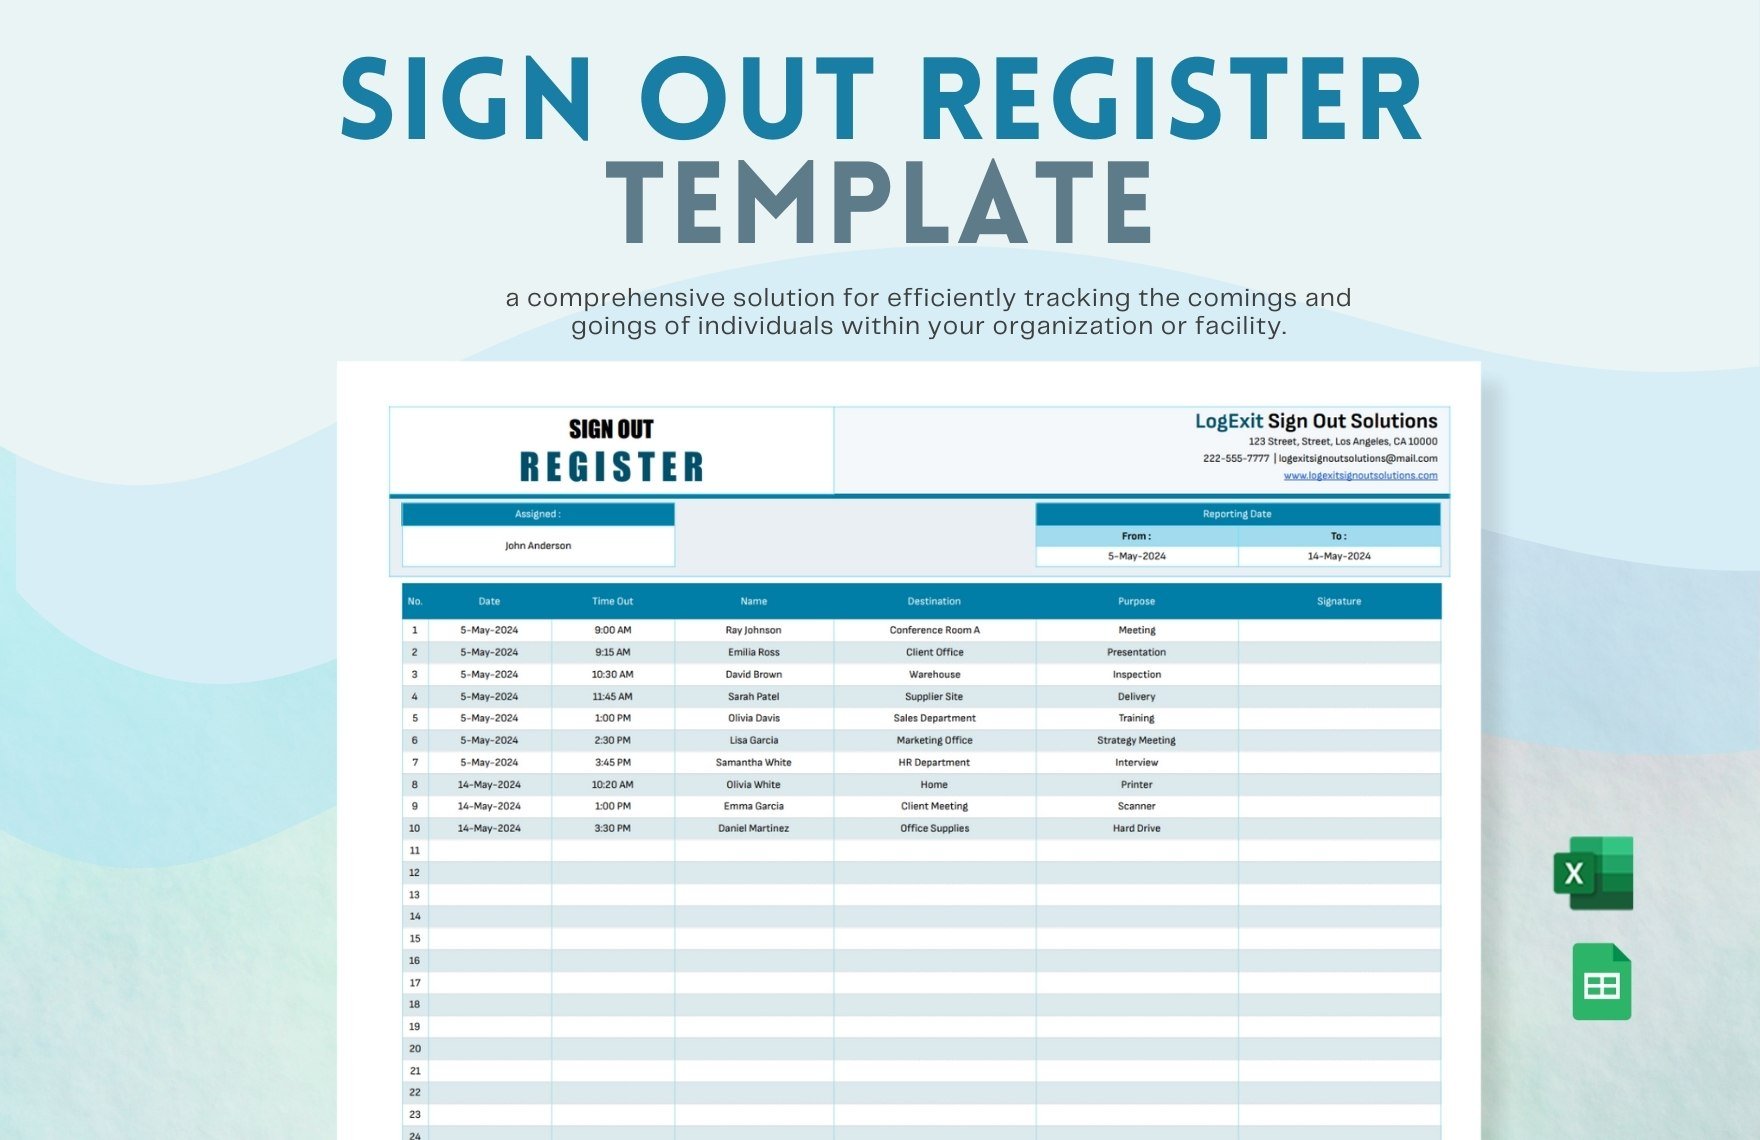 Sign Out Register Template